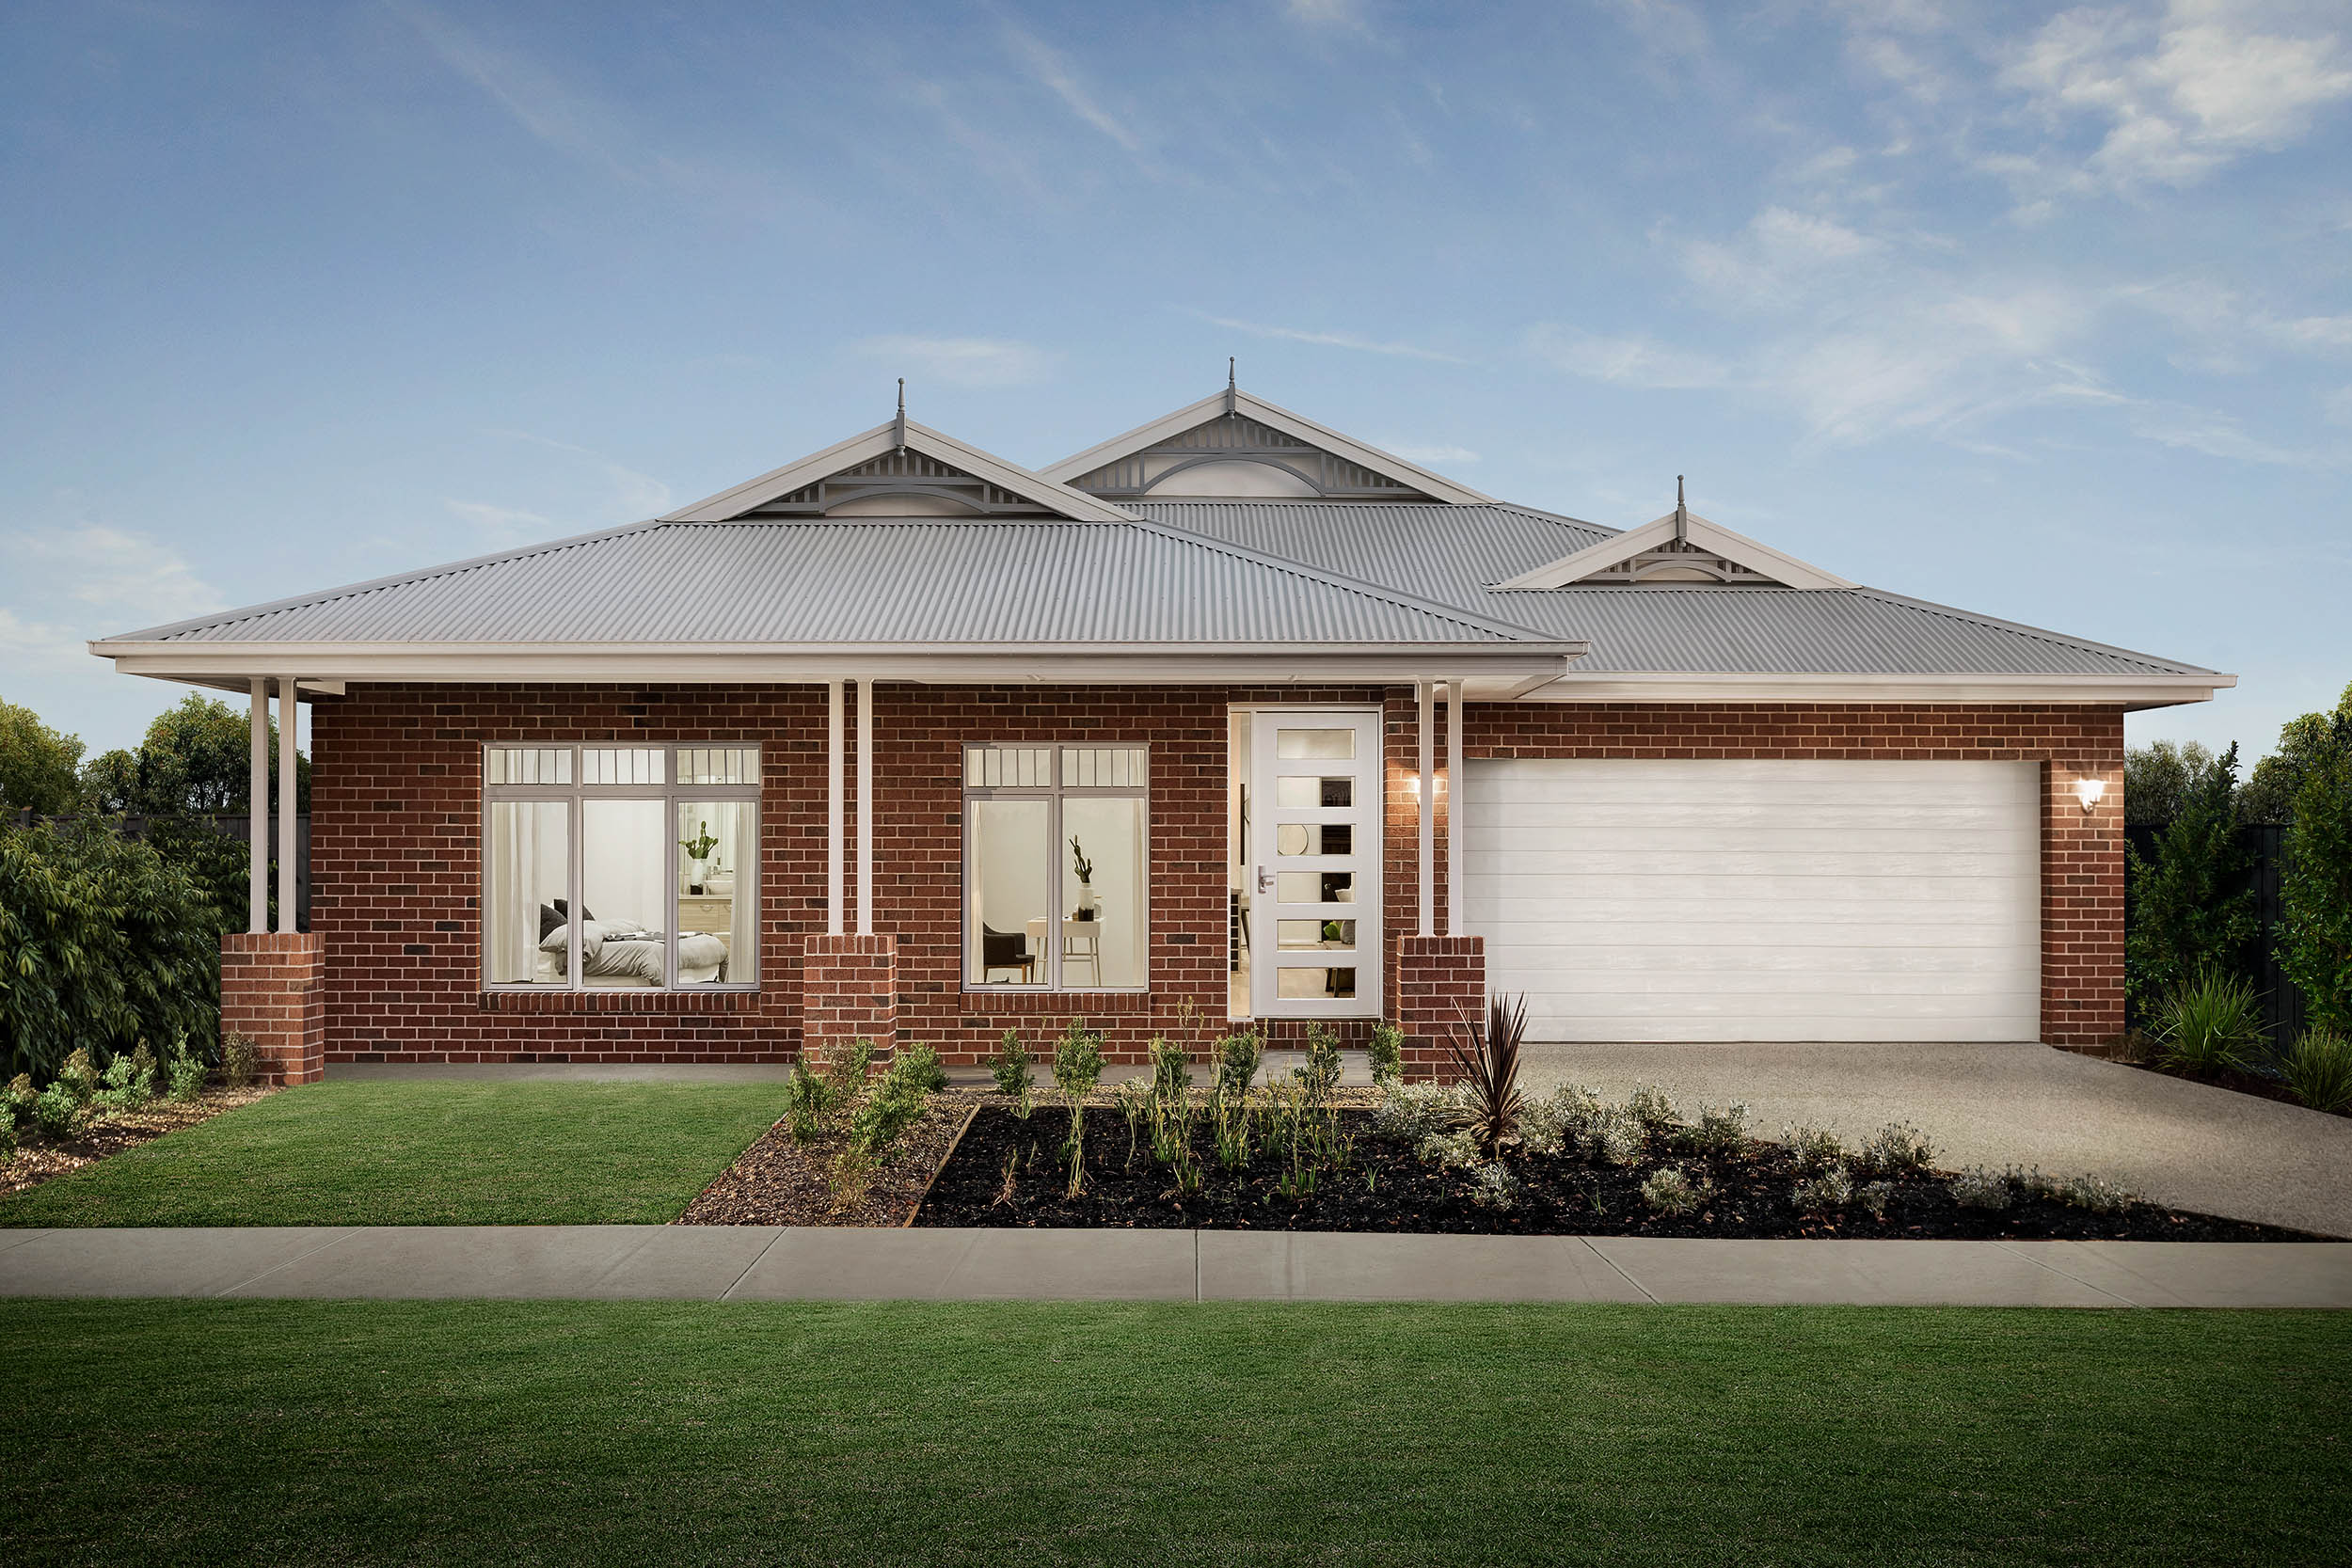 Home Builders Melbourne.jpg  by Nostrahomes